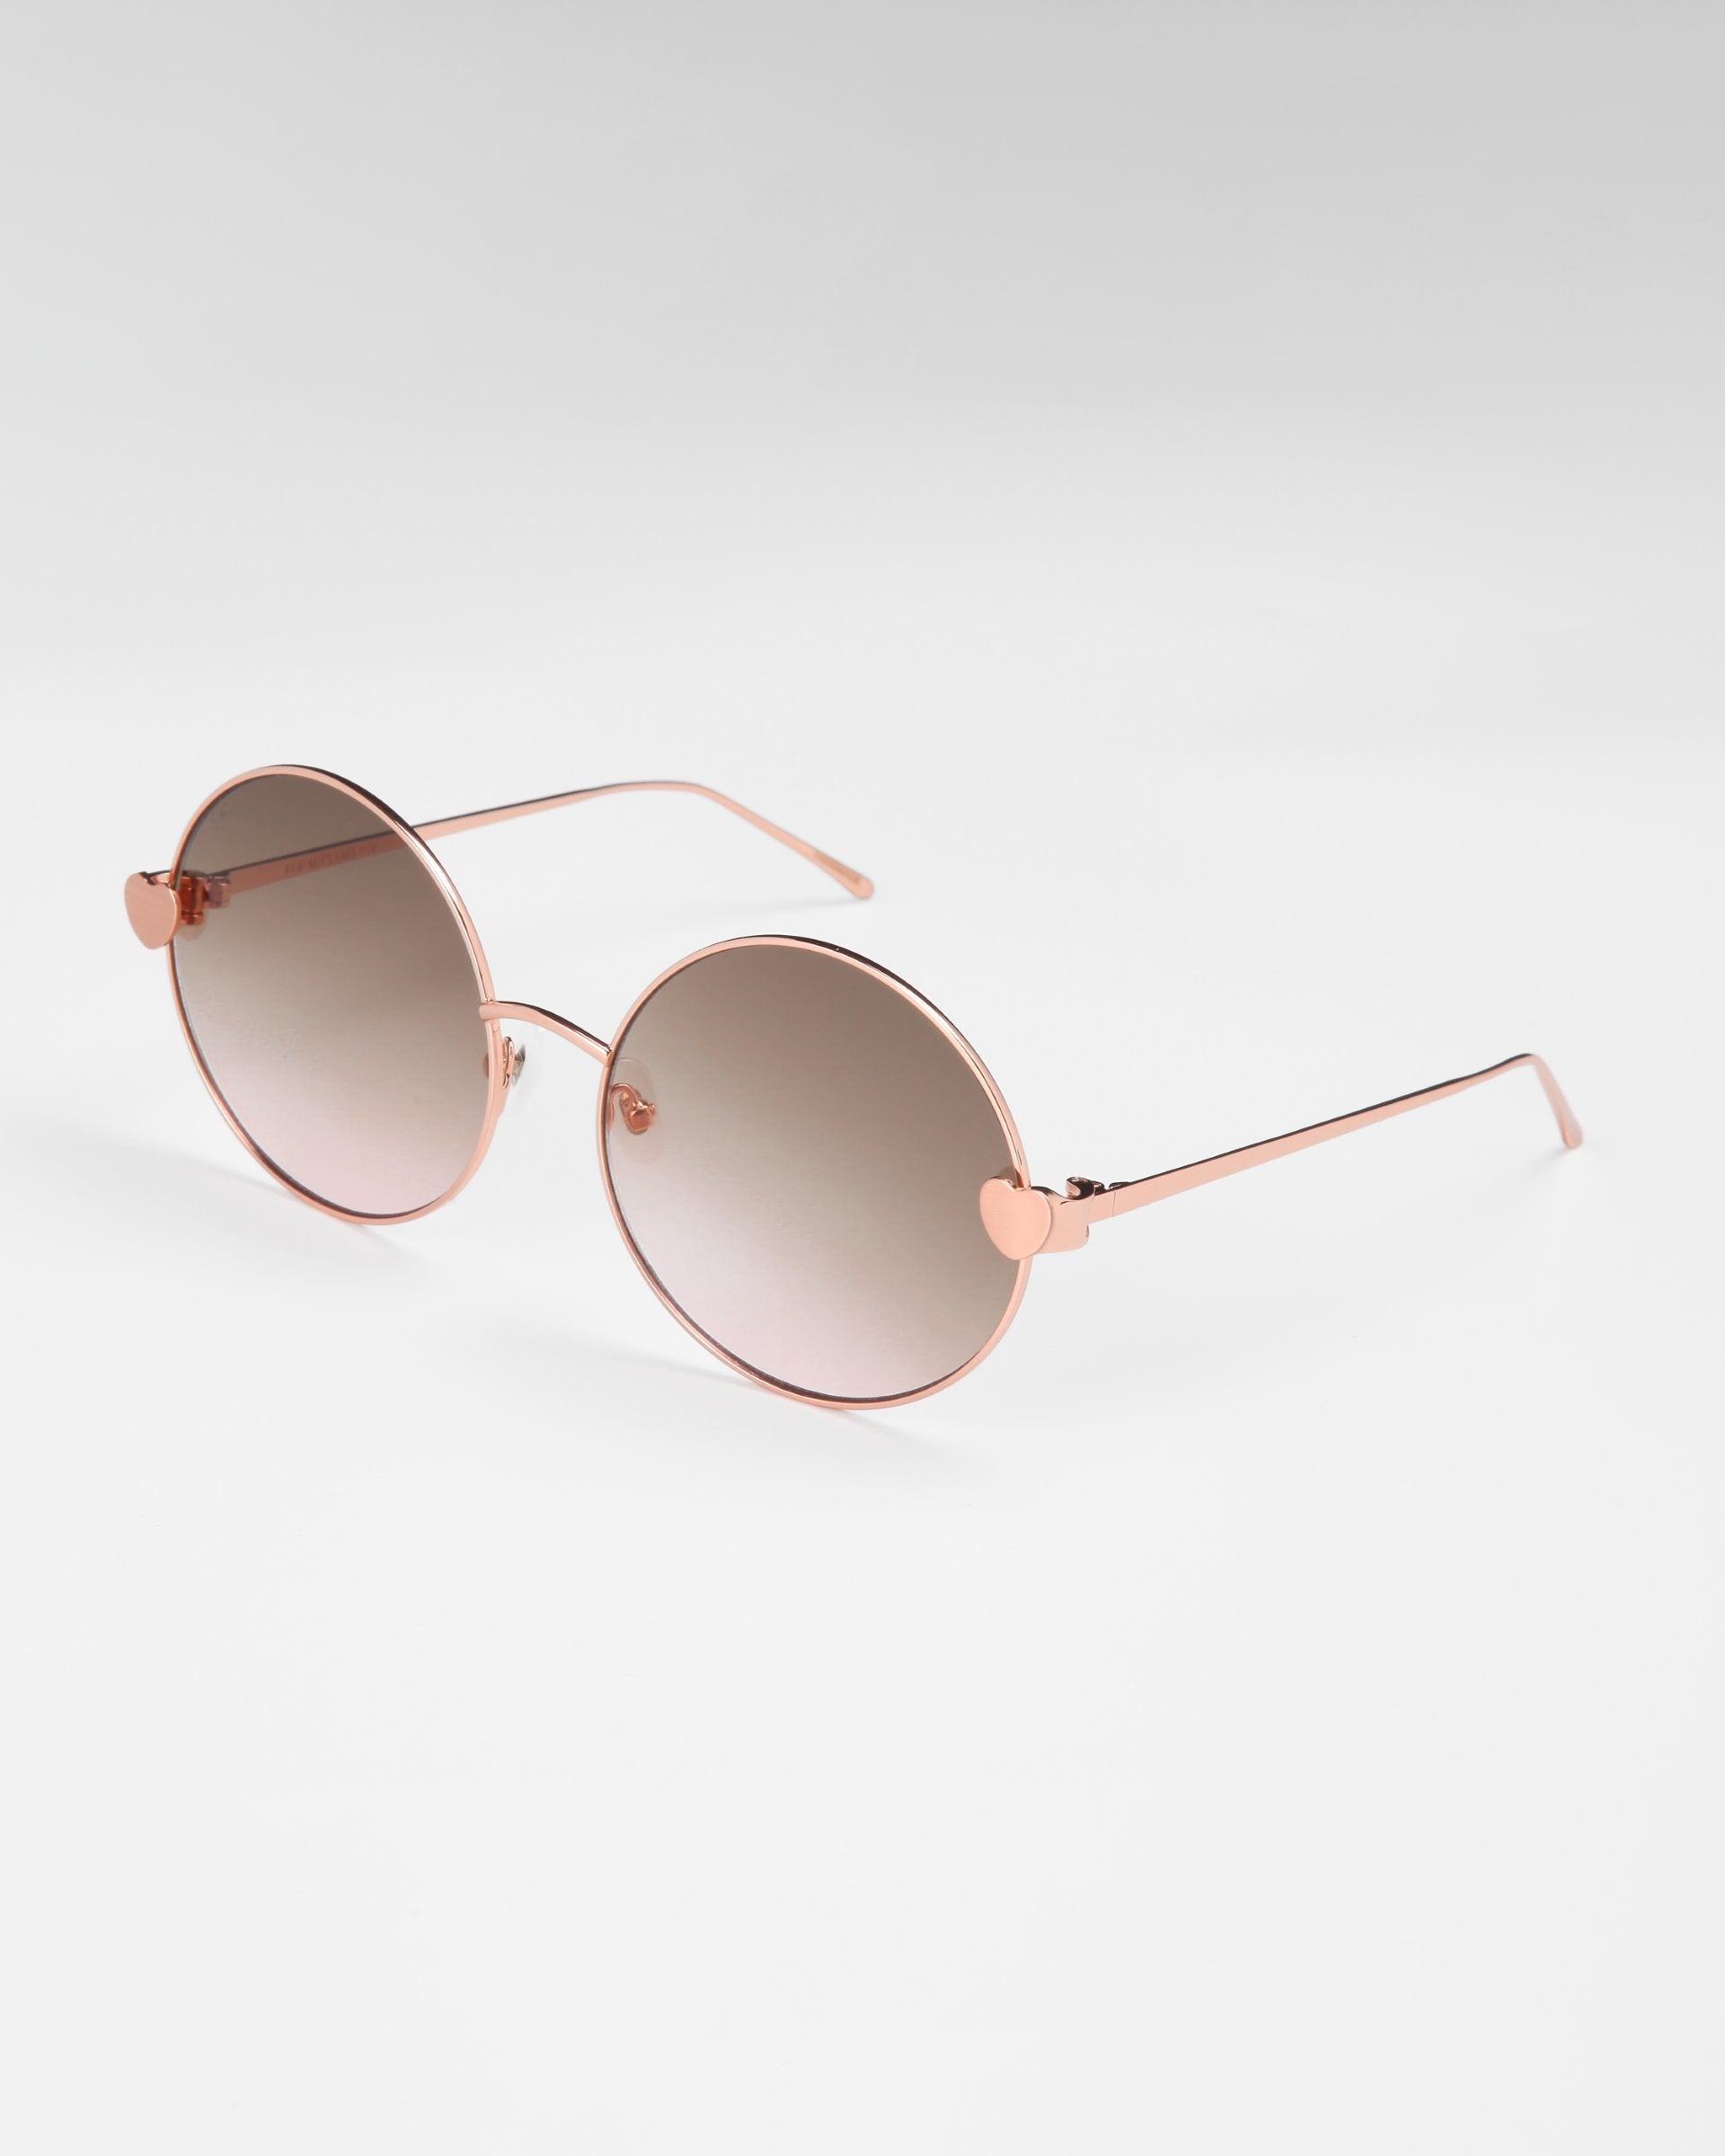 A pair of stylish For Art's Sake® Love Story shades with round sunglasses, featuring a rose gold frame and brown gradient lenses. The temples are sleek with thin arms, and there are heart-shaped accents where the lenses meet the frame. Equipped with jadestone nose pads for comfort and 100% UV protection. The background is plain white.